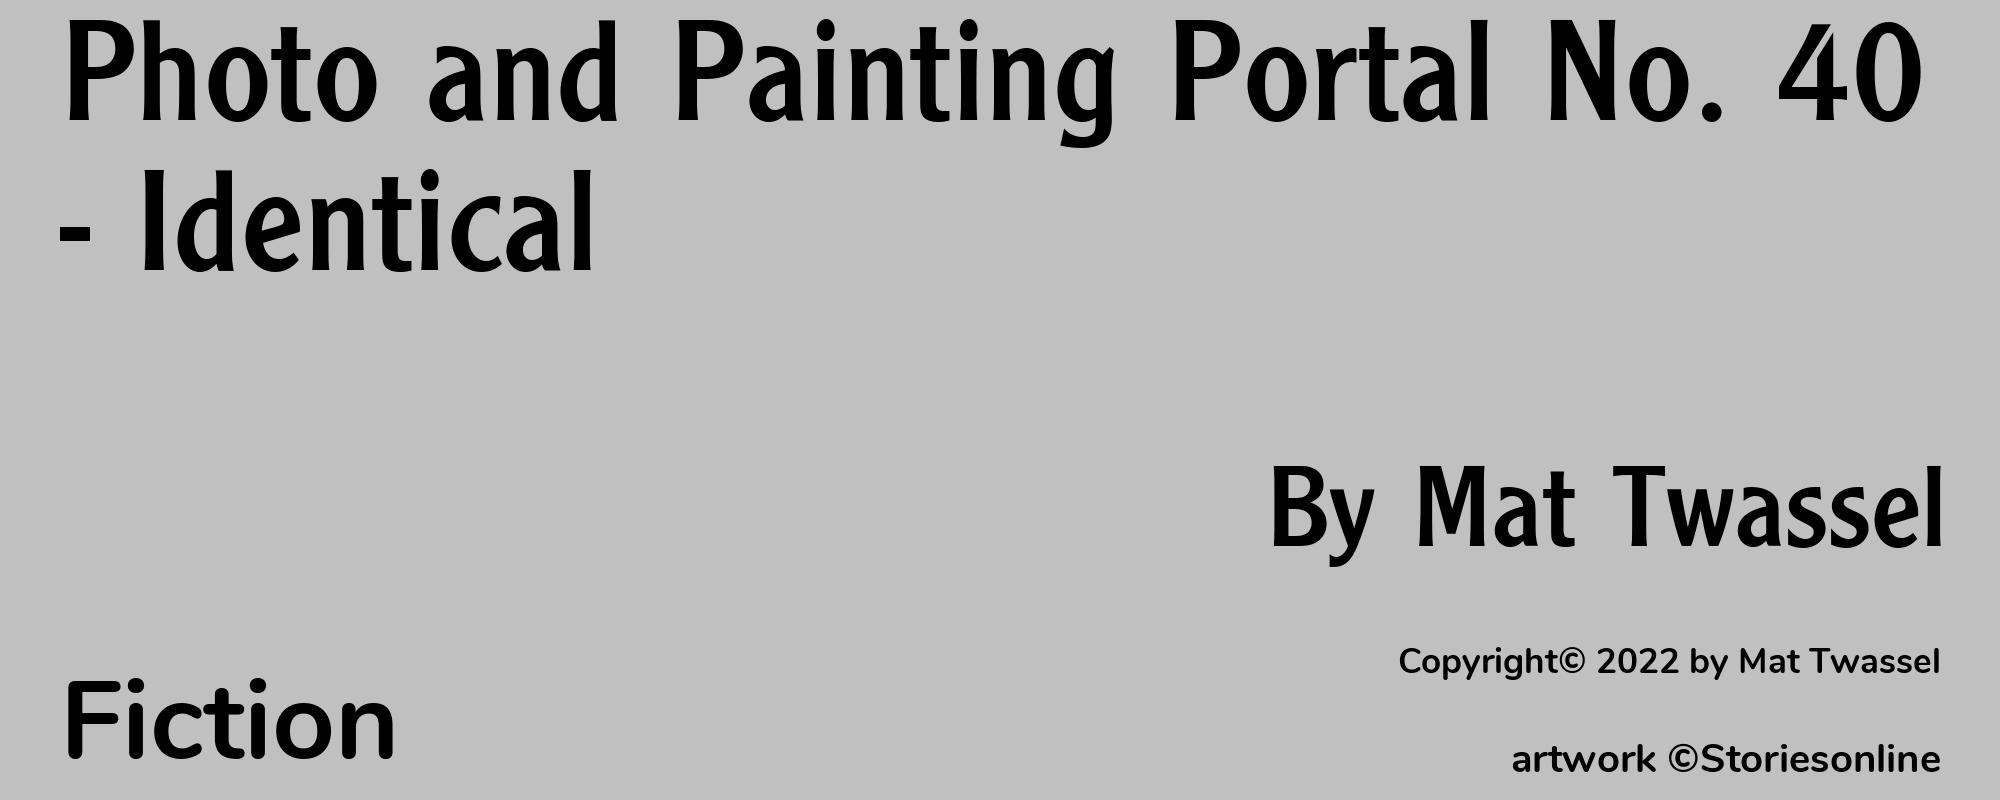 Photo and Painting Portal No. 40 - Identical - Cover